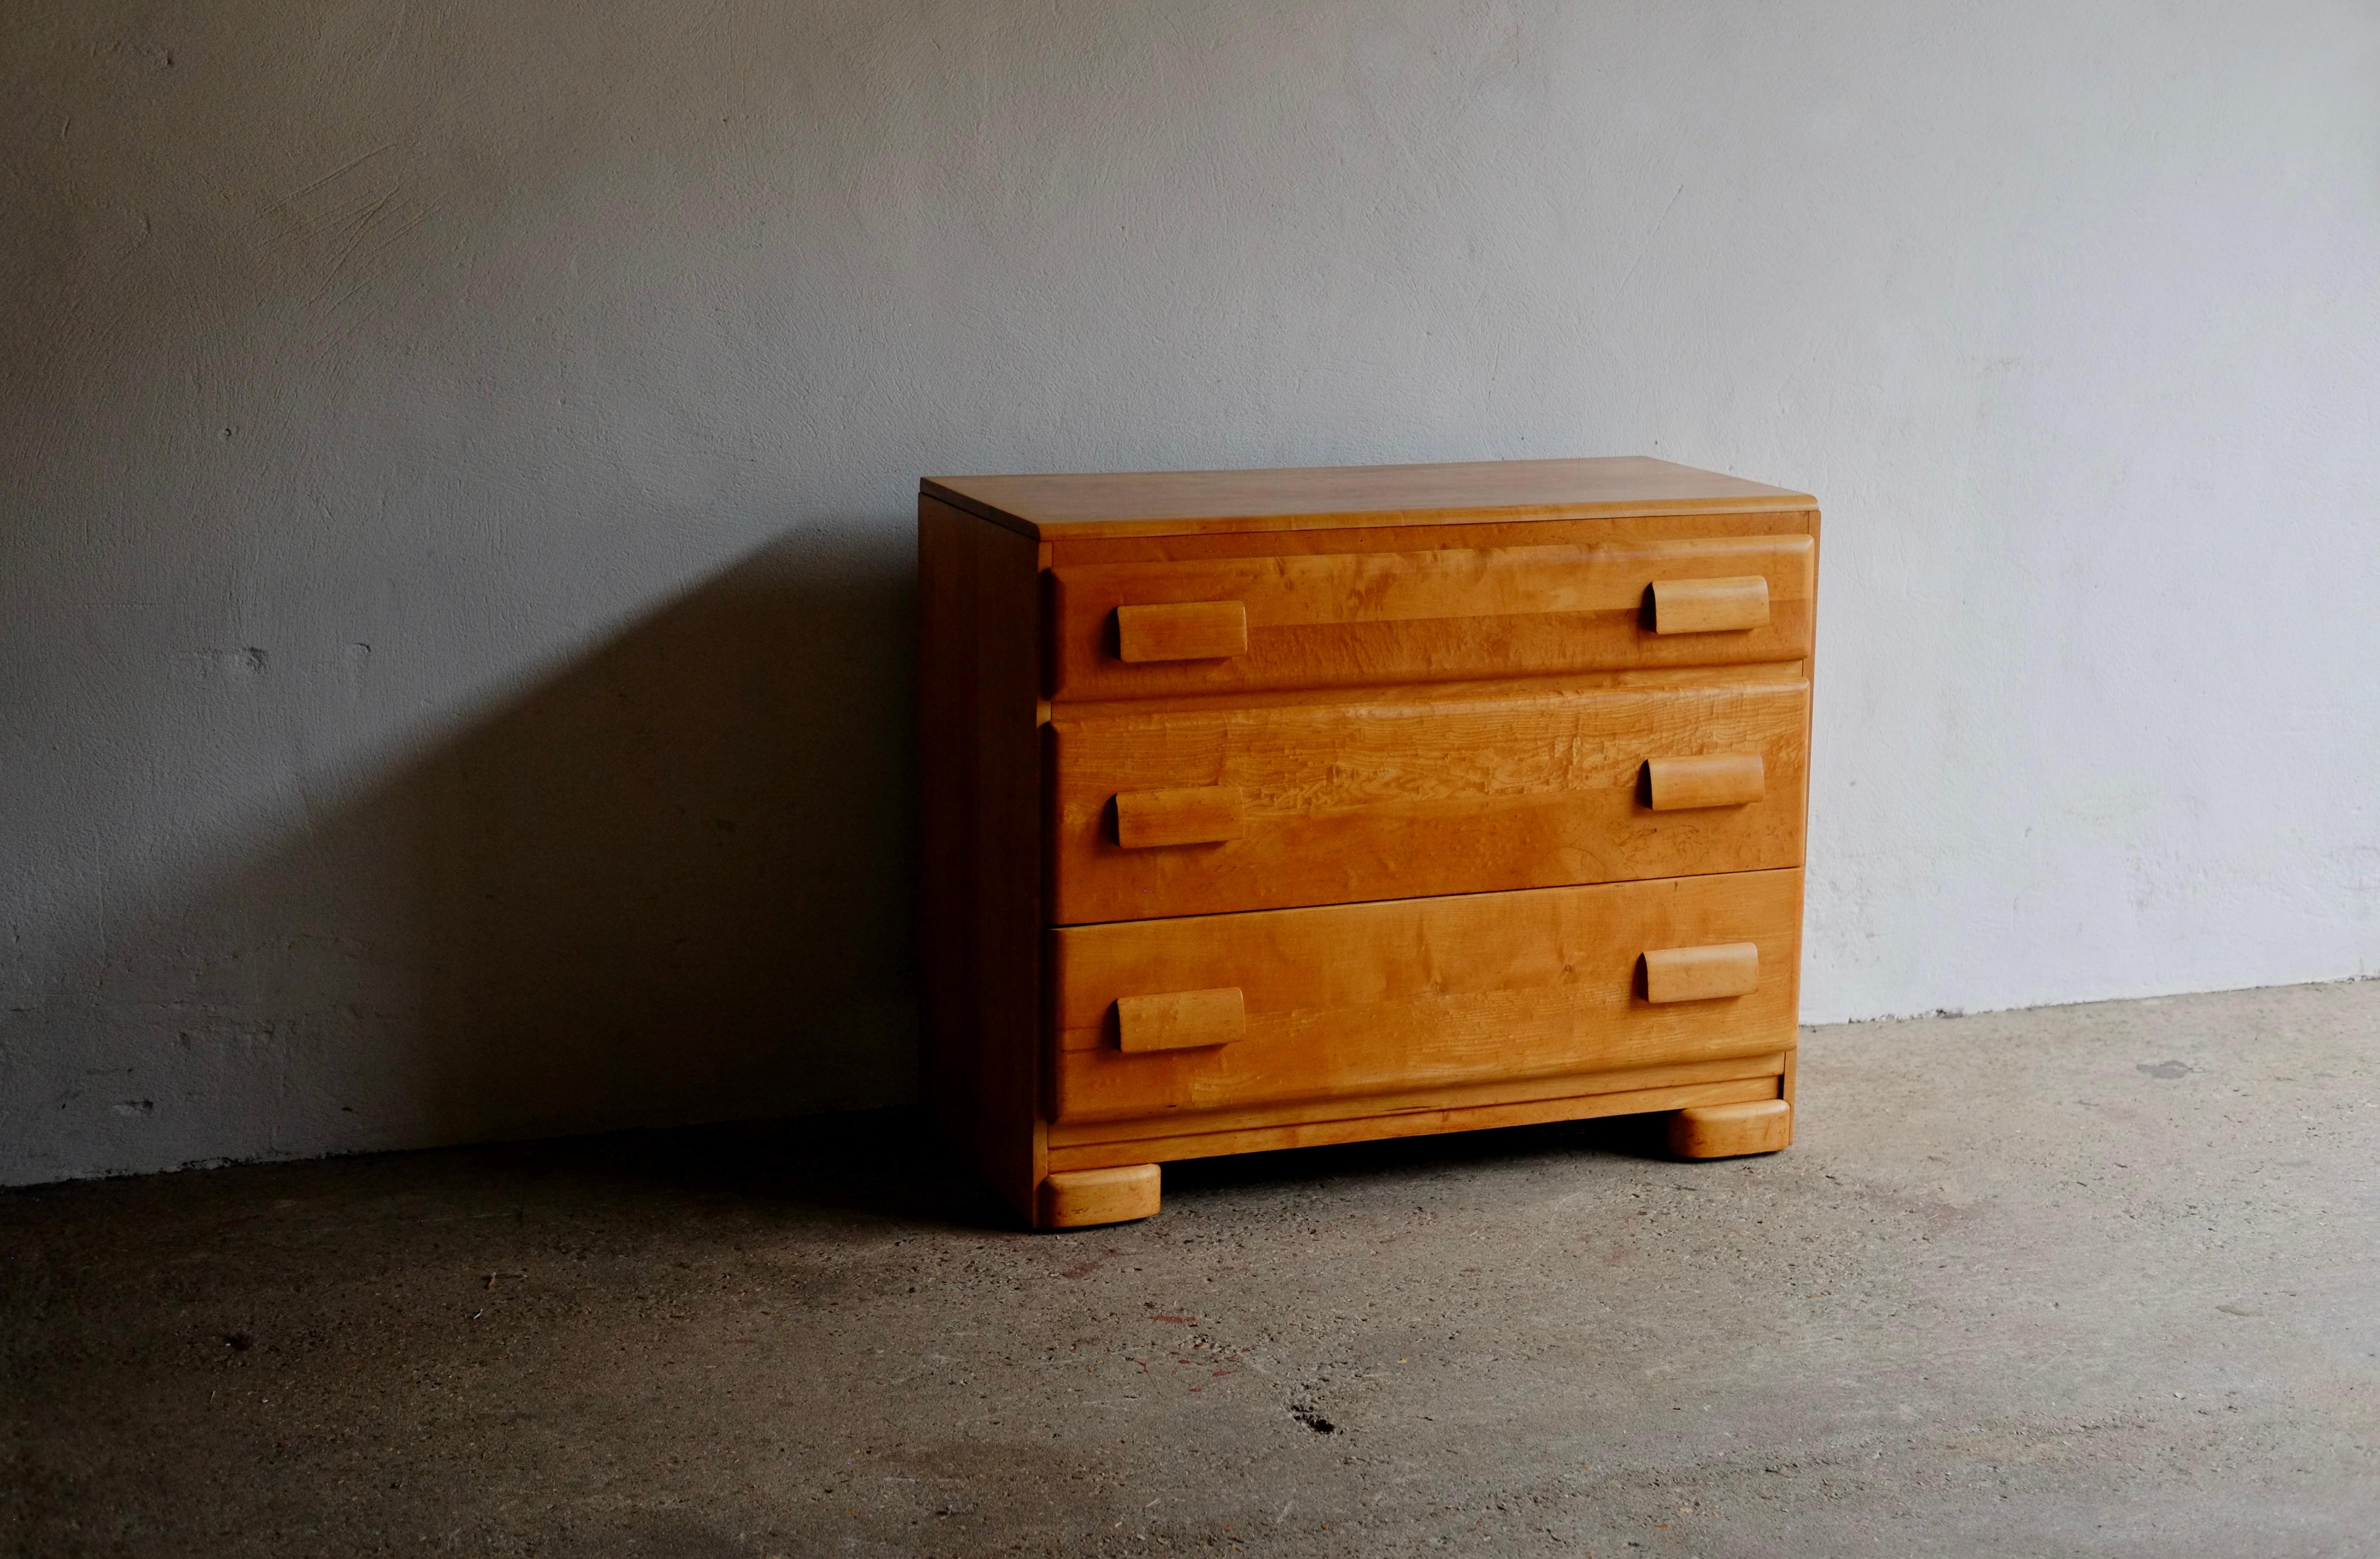 A mid-century honey tone maple chest of drawers in an Art Deco style by Russel Wright and produced by American company Conant Ball. 

In good solid vintage condition with light markings to the top (see photo).